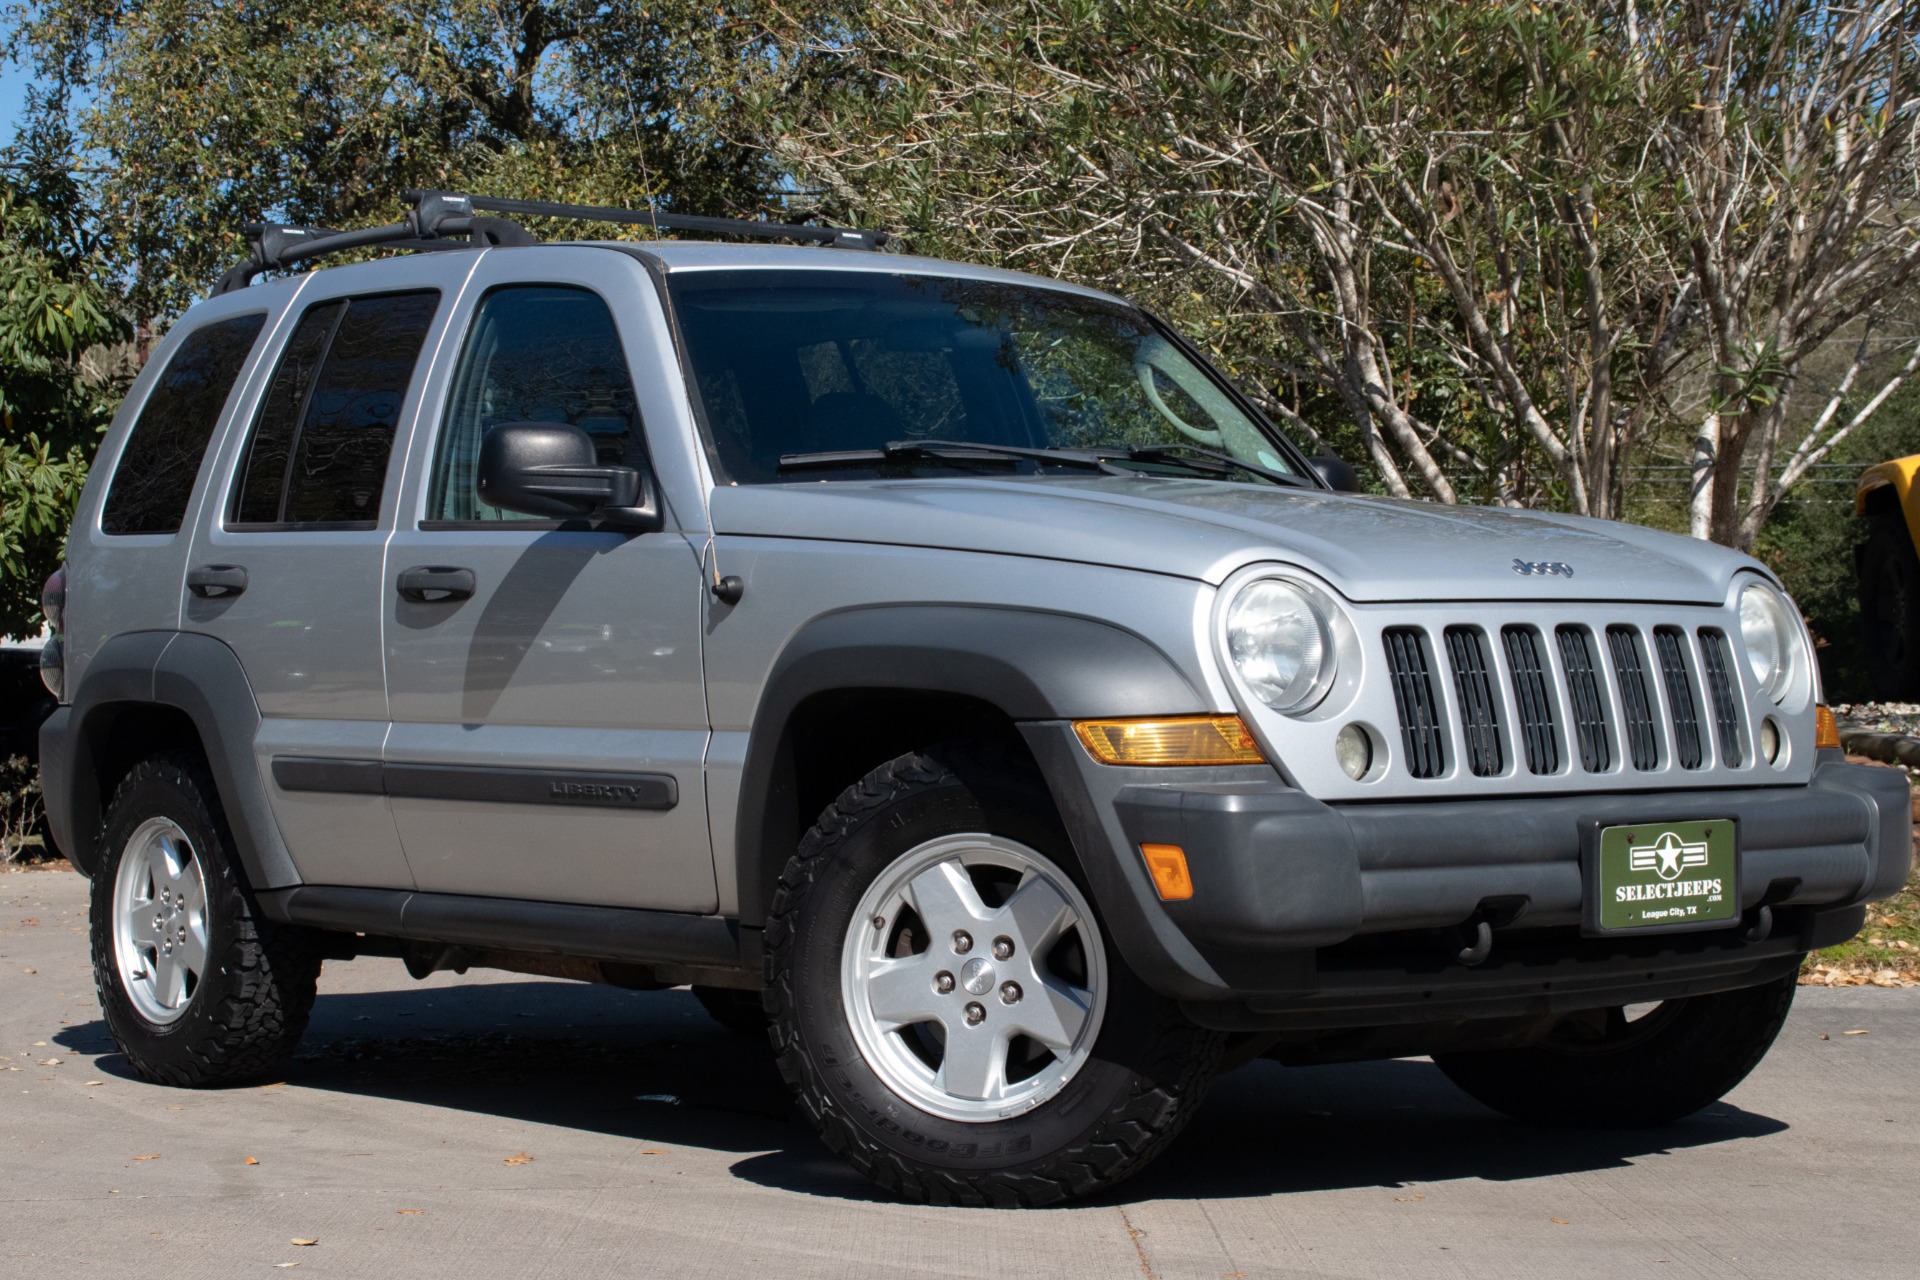 Used 2006 Jeep Liberty Sport For Sale ($5,995) | Select Jeeps Inc. Stock  #184510